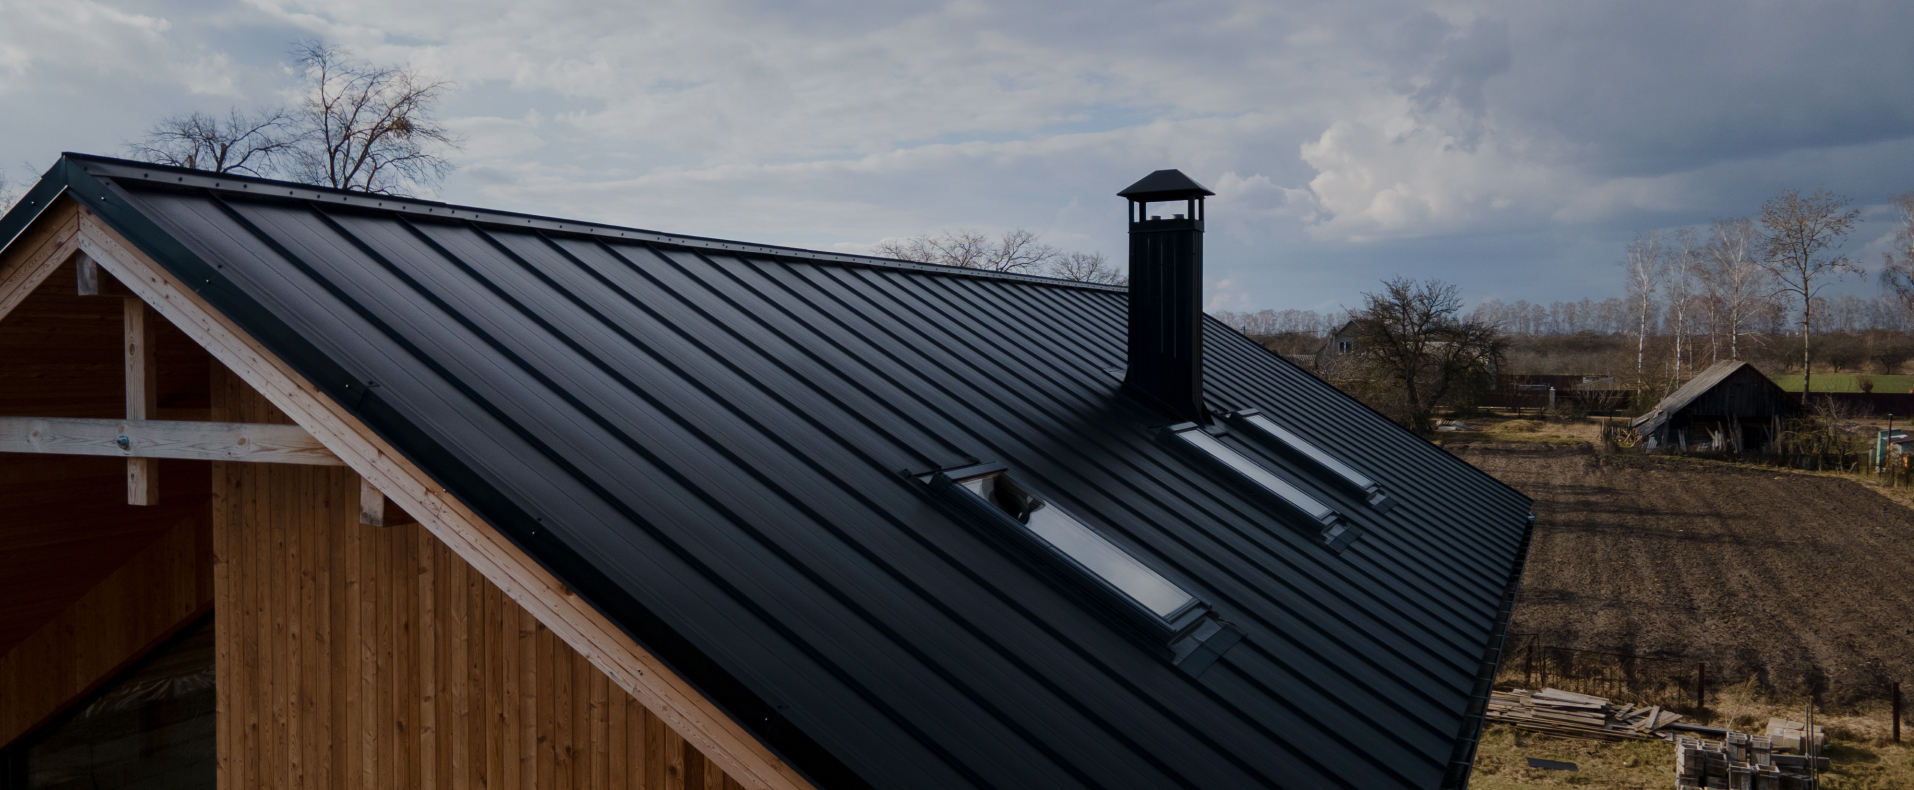 What are the advantages of choosing metal roofing over other Roofing Materials?